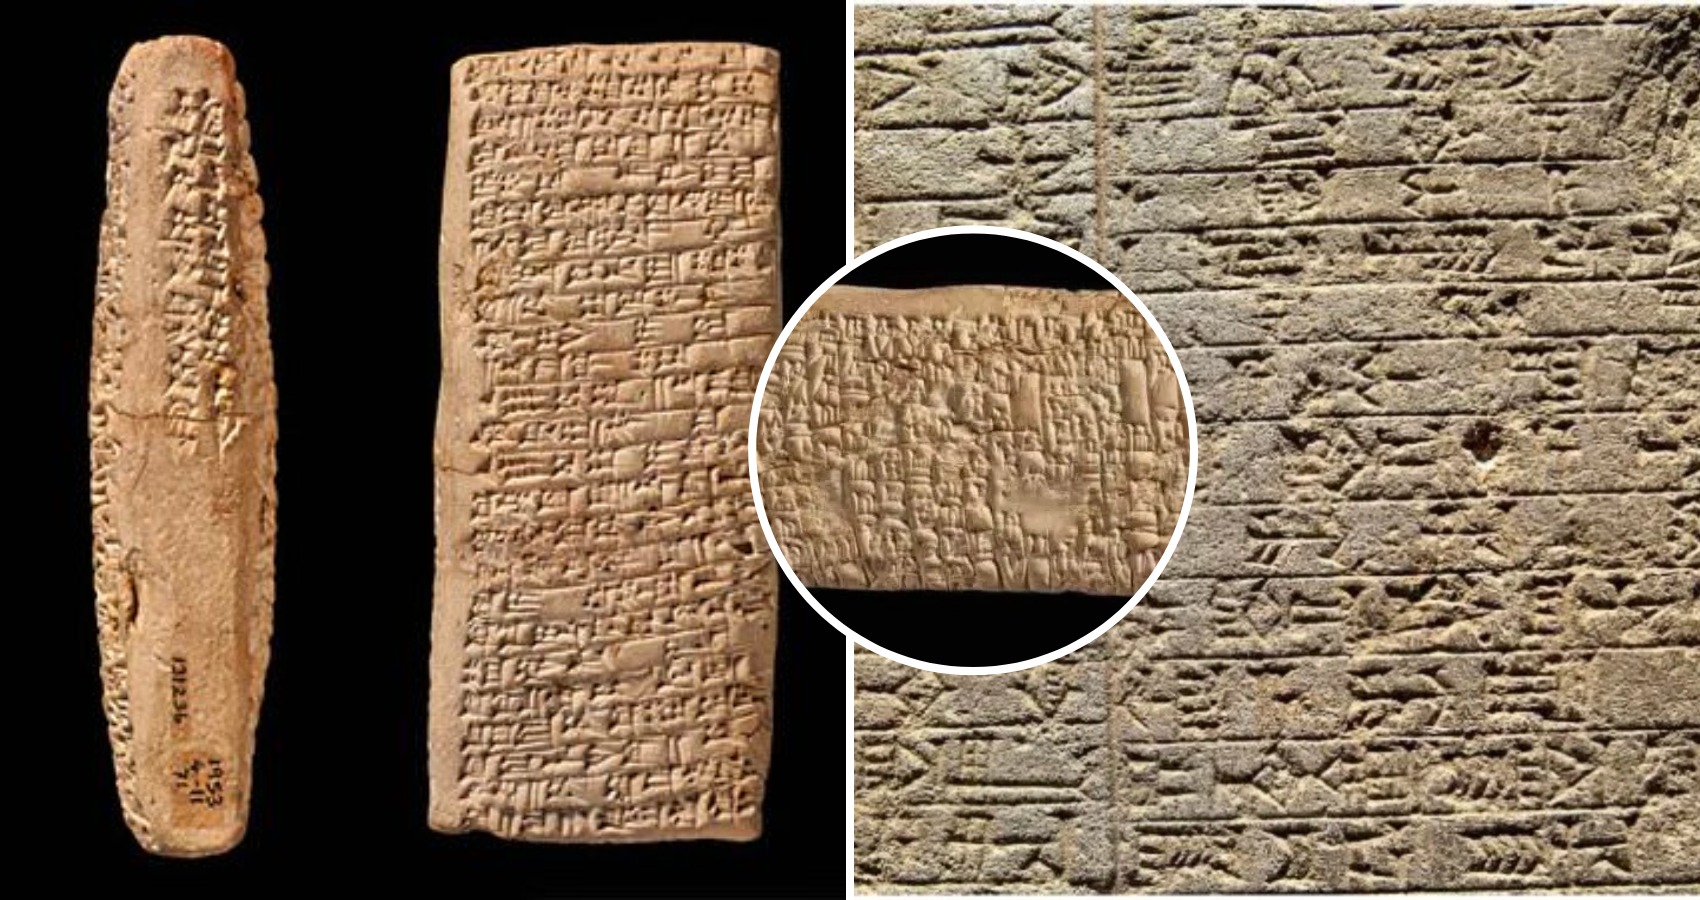 4,000-yr-old Tablet is the World’s Oldest Customer Service Complaint